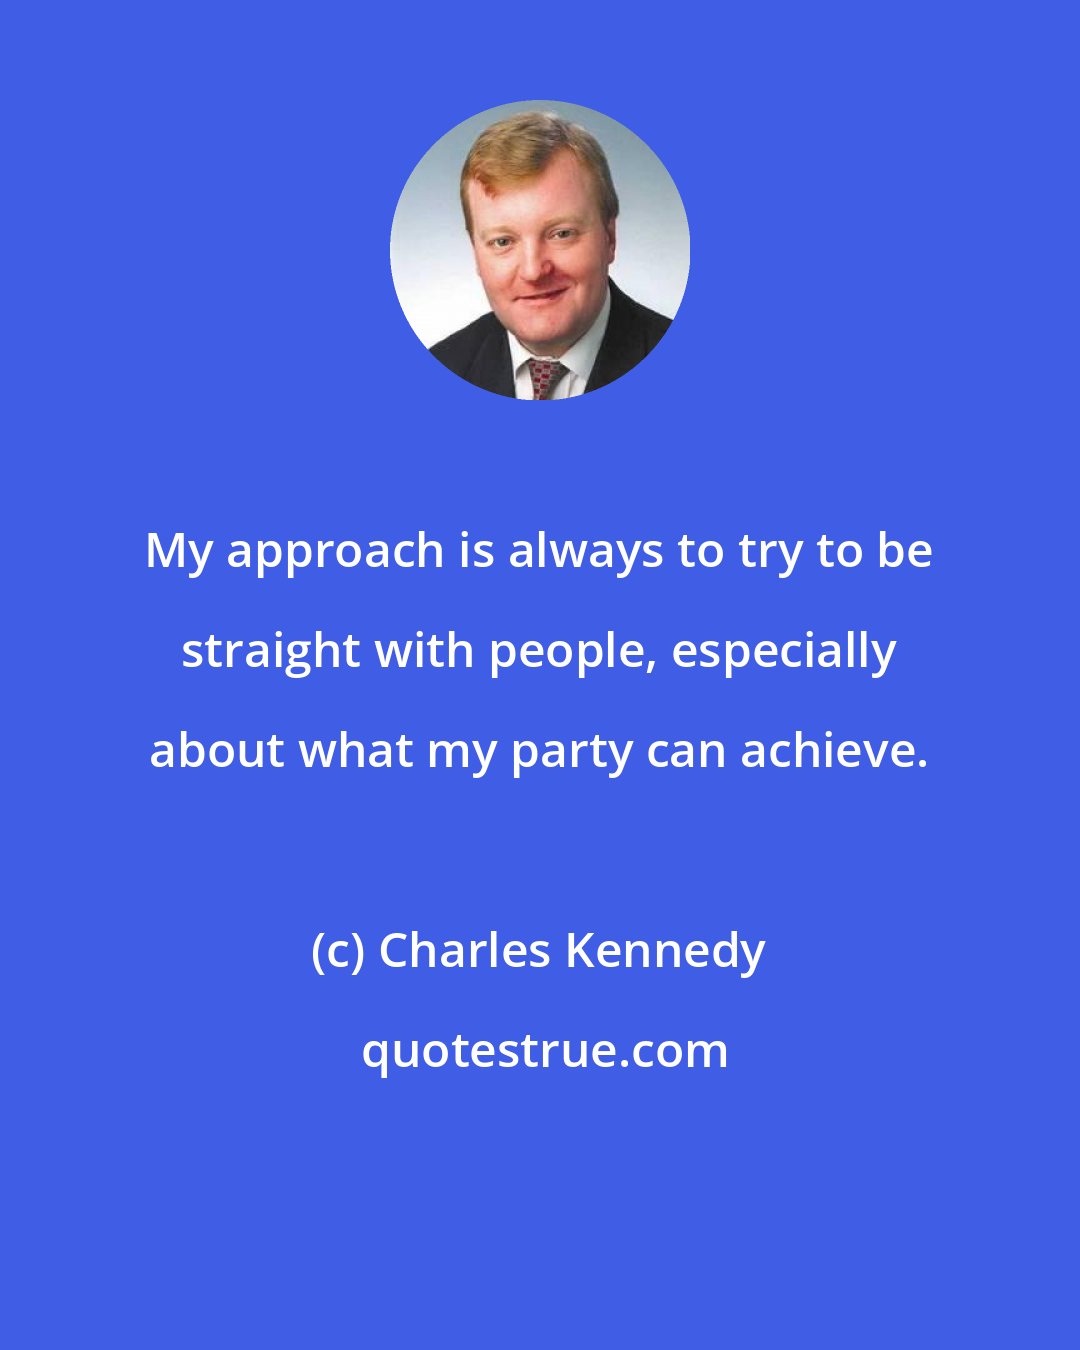 Charles Kennedy: My approach is always to try to be straight with people, especially about what my party can achieve.